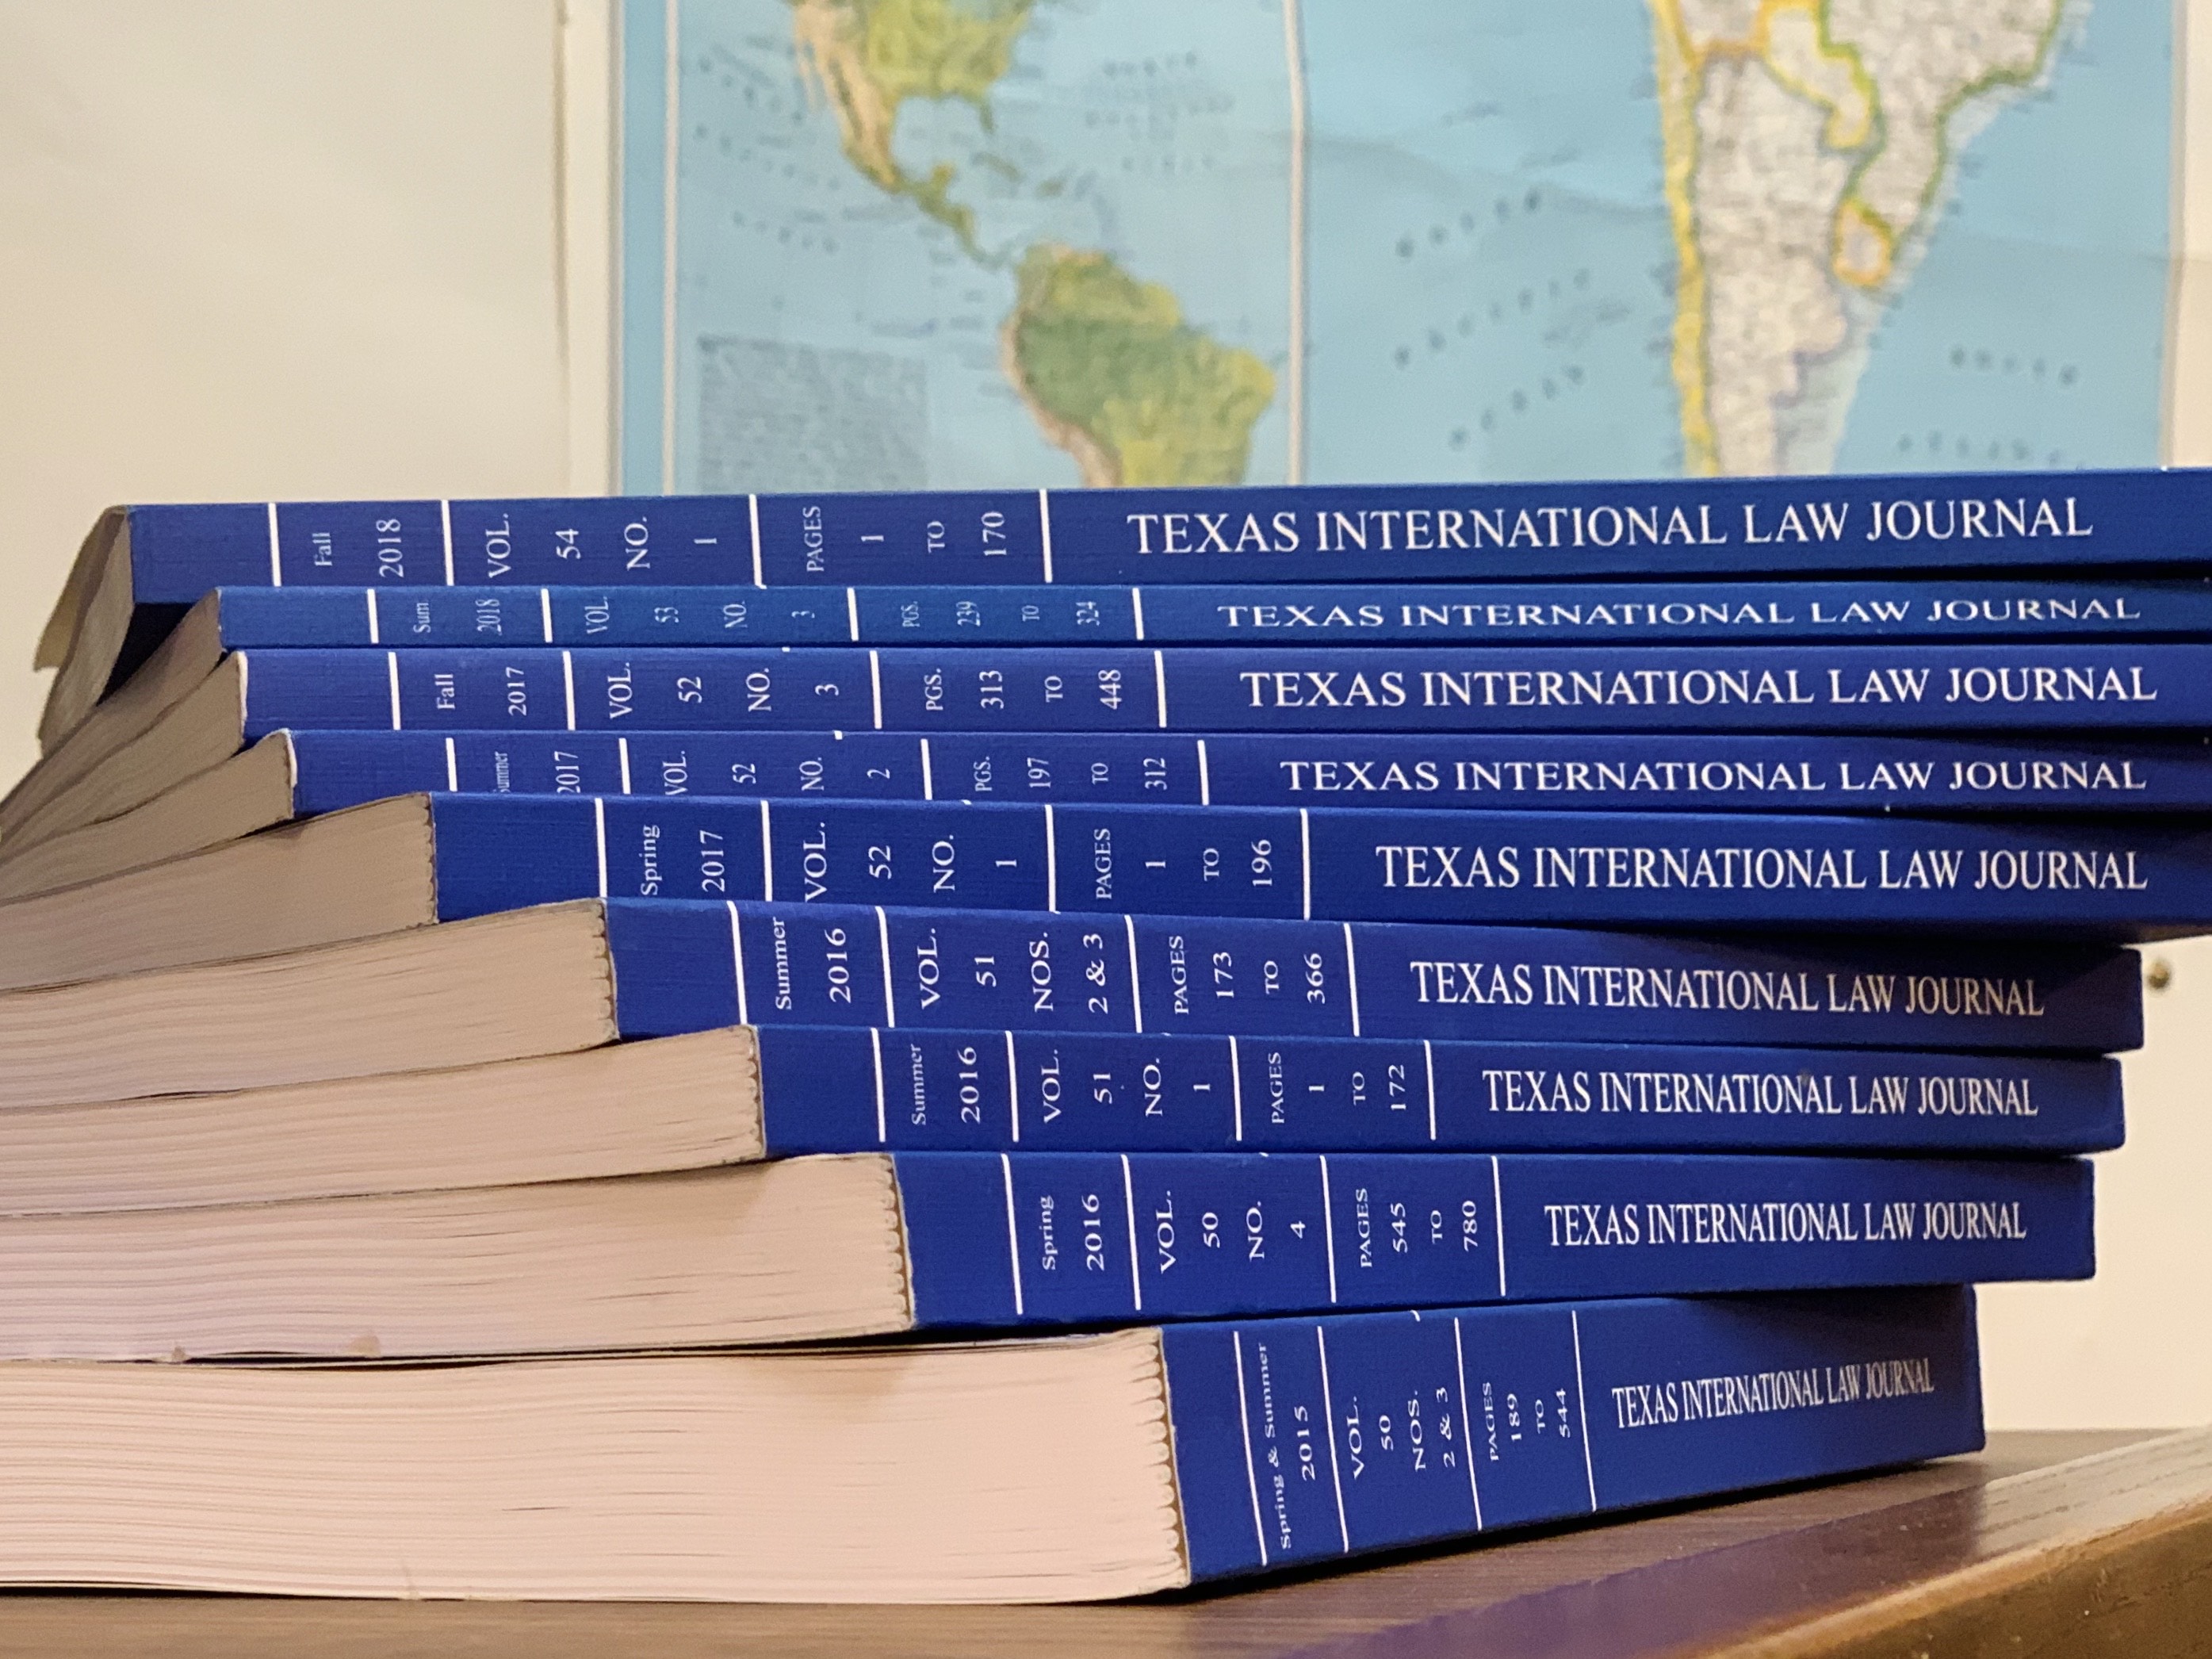 A stack of the blue Texas International Law Journal books, with a world map hanging on the wall behind them